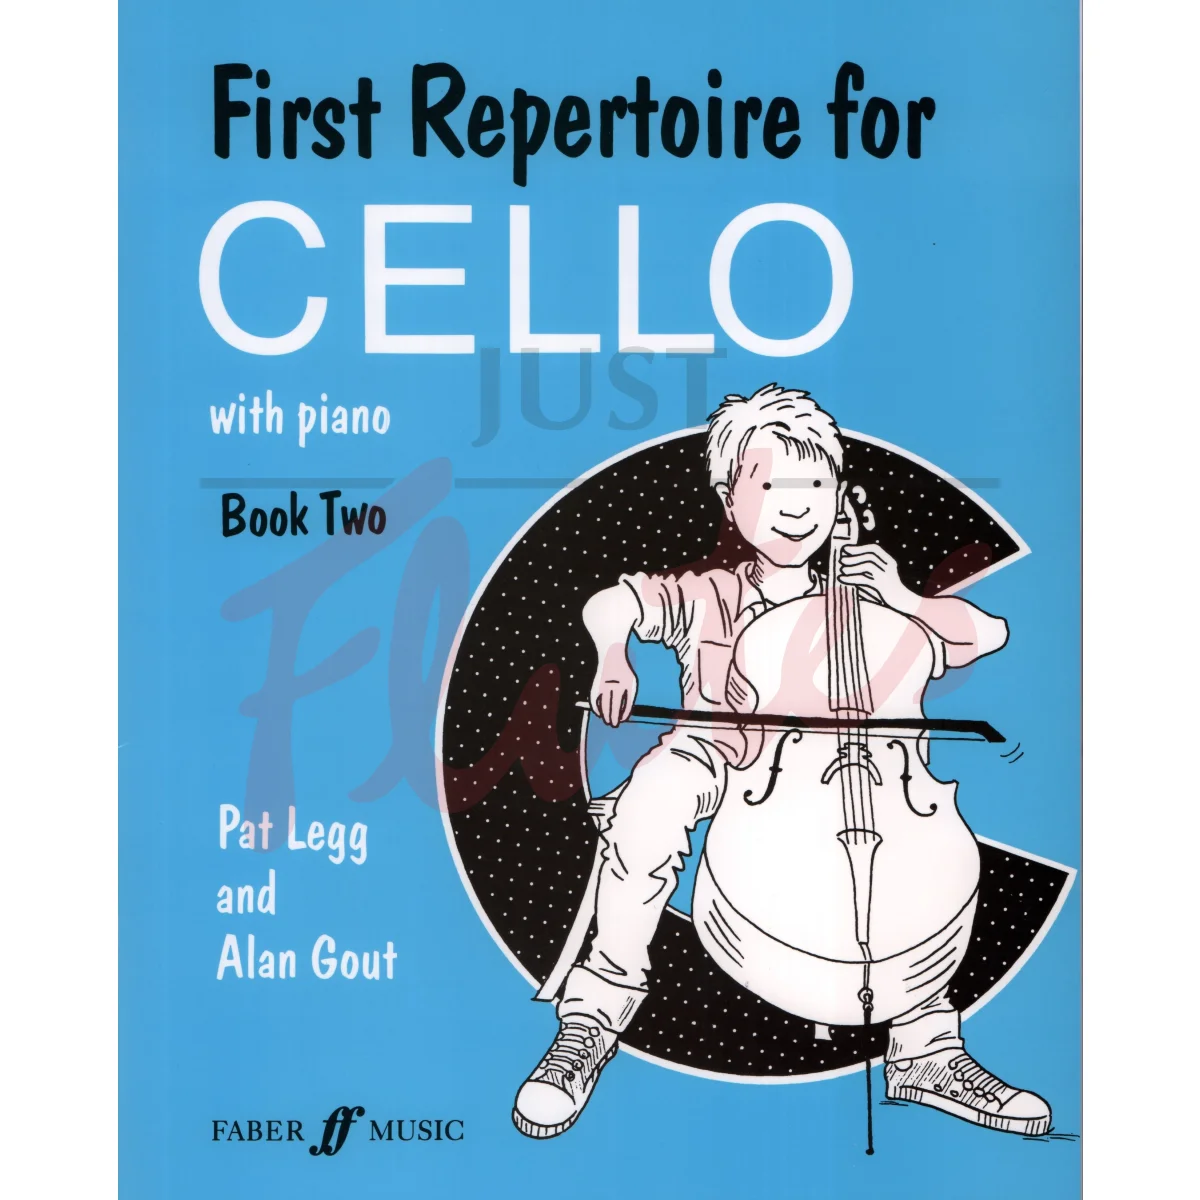 First Repertoire Book 2 for Cello and Piano